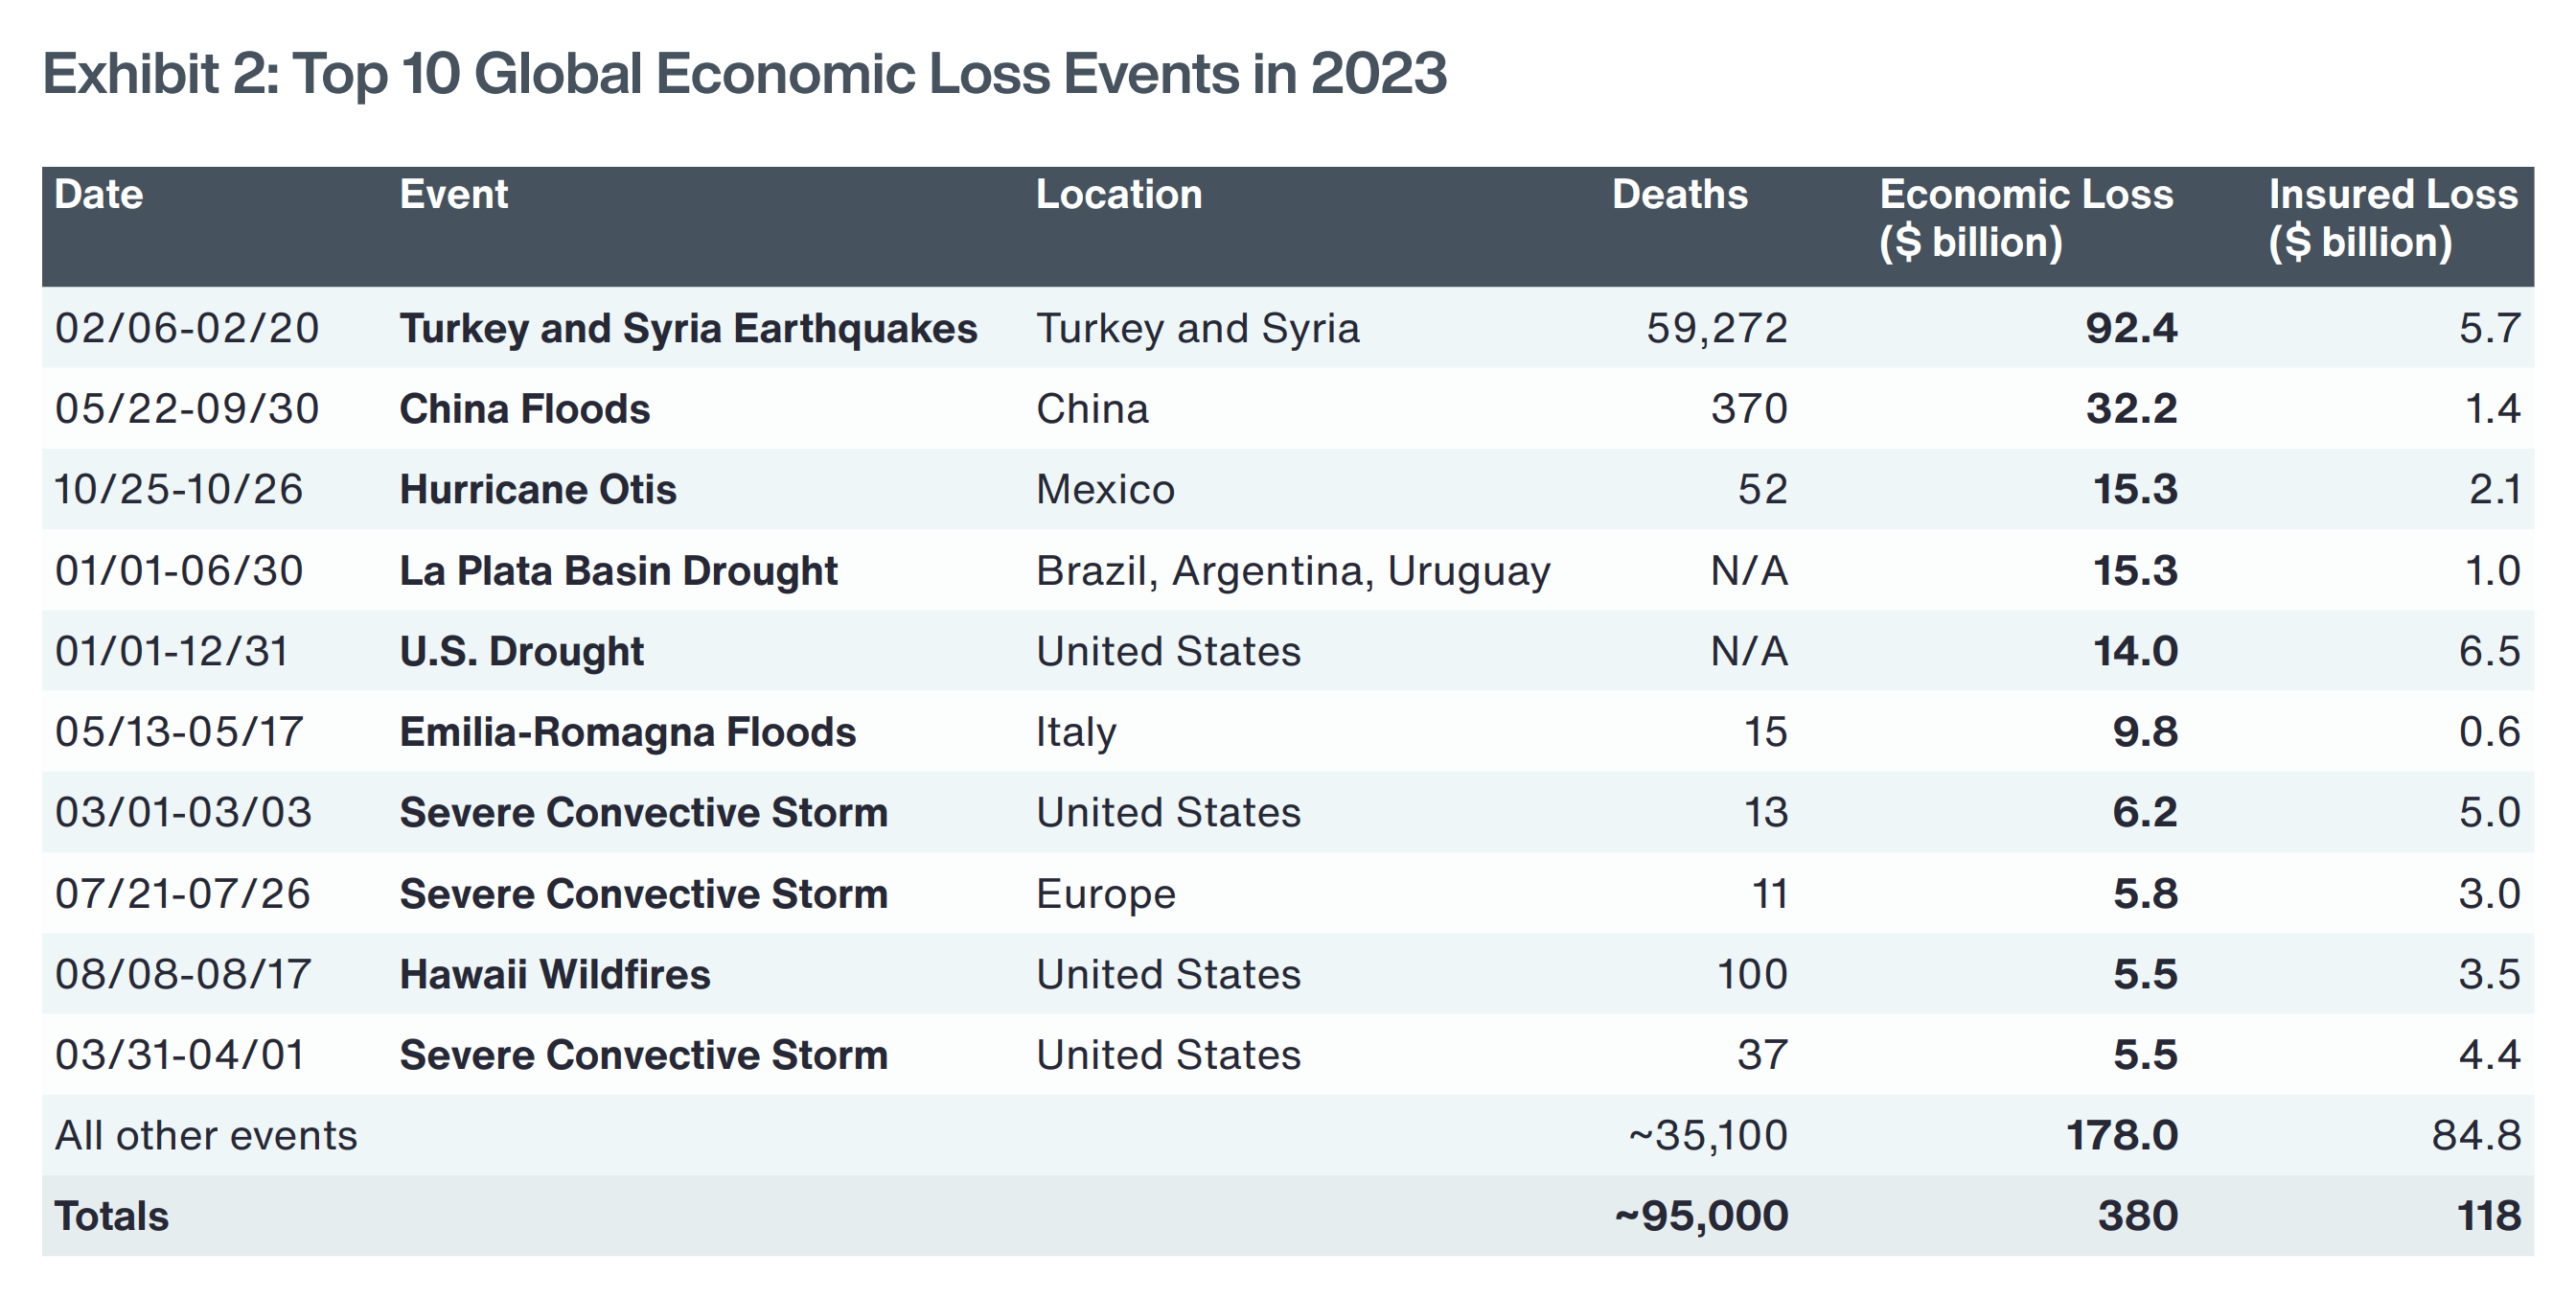 Table showing the Top 10 global economic loss events in 2023 due to natural and climate disasters. Approximately a quarter of all economic losses in 2023 were attributed to the disastrous earthquake sequence in Turkey and Syria, which struck the region in February. Widespread impact on property and infrastructure resulted in more than $90 billion in direct damage — making it the costliest natural disaster recorded in both Turkey and Syria, the Middle East and the entire EMEA region in modern history. At least four other events have crossed the $10 billion dollar economic damage threshold, with China reporting total flood damage in excess of $30 billion again, after a below-average loss year in 2022. Powerful Hurricane Otis made its devastating landfall at Category 5 intensity near Acapulco in Mexico and made history as the strongest landfalling hurricane in Eastern Pacific. Drought was prominent in North and South America. While only three severe convective storm events ranked among the top 10 individual economic losses of 2023 and none of them surpassed $10 billion, the peril was responsible for more than $94 billion in combined damage. Graphic: Aon